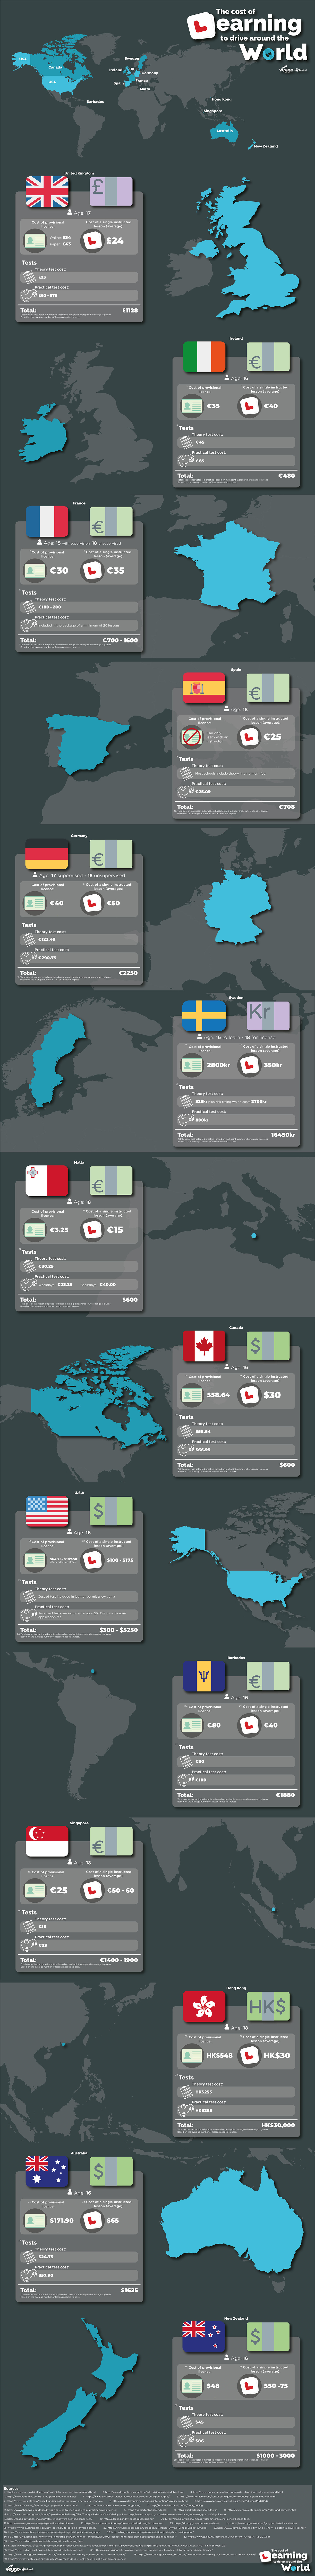 cost of learning to drive around the world infographic